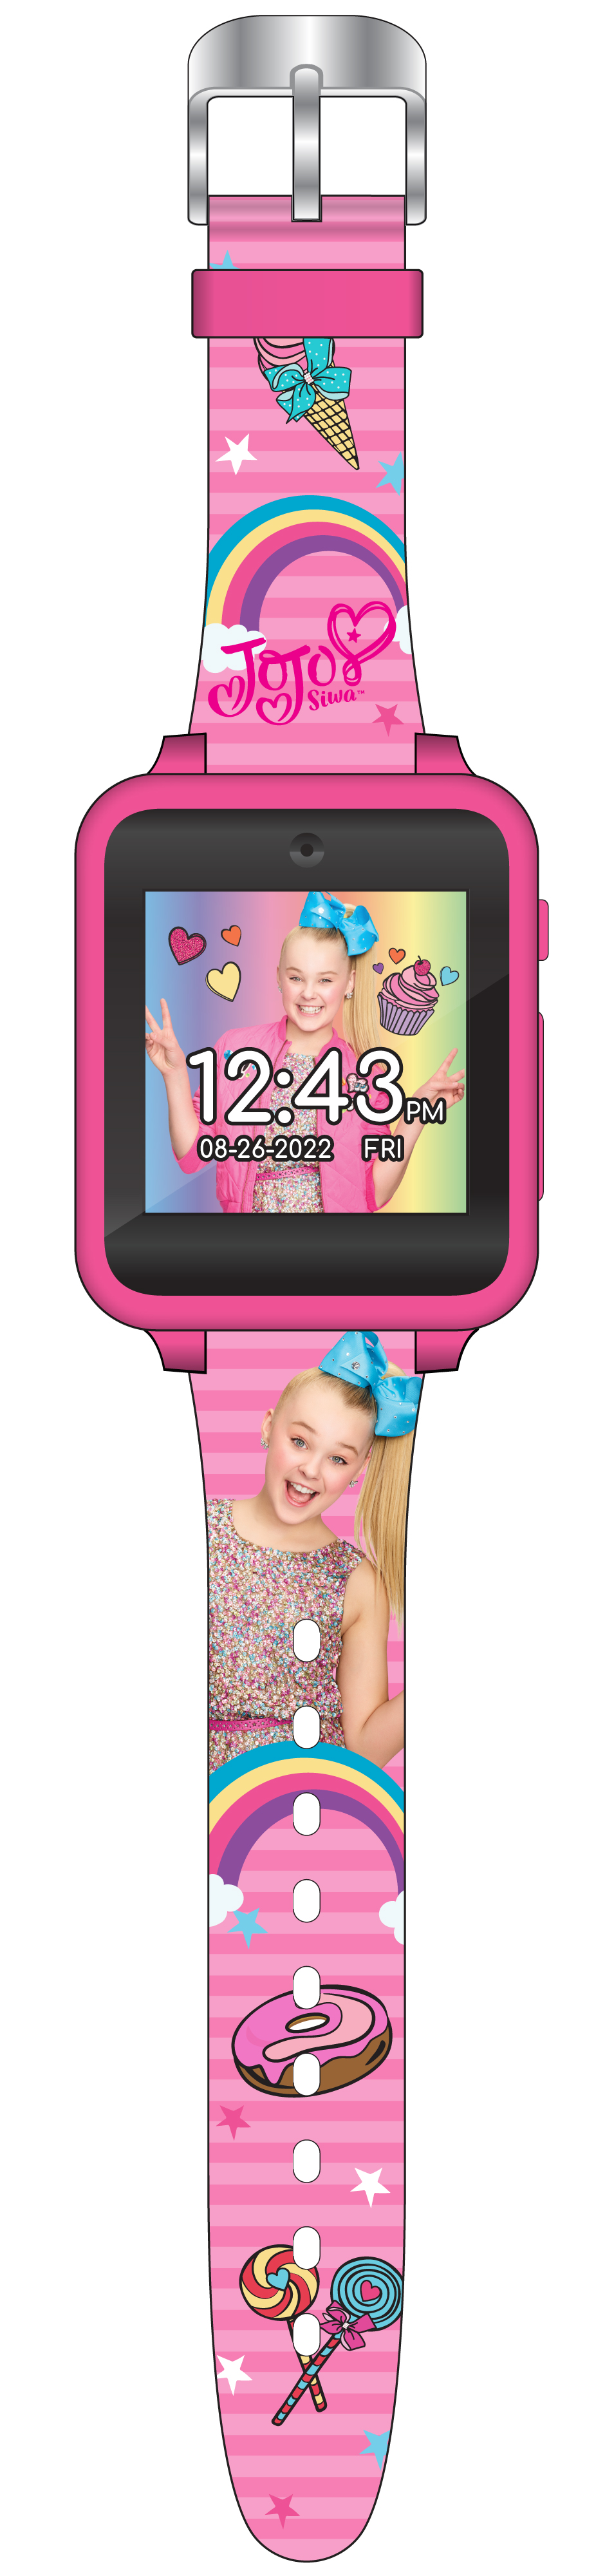 Jojo Siwa iTime Unisex Child Interactive Smart Watch 40mm in Pink with Silicone Strap (JOJ4128) - image 5 of 5